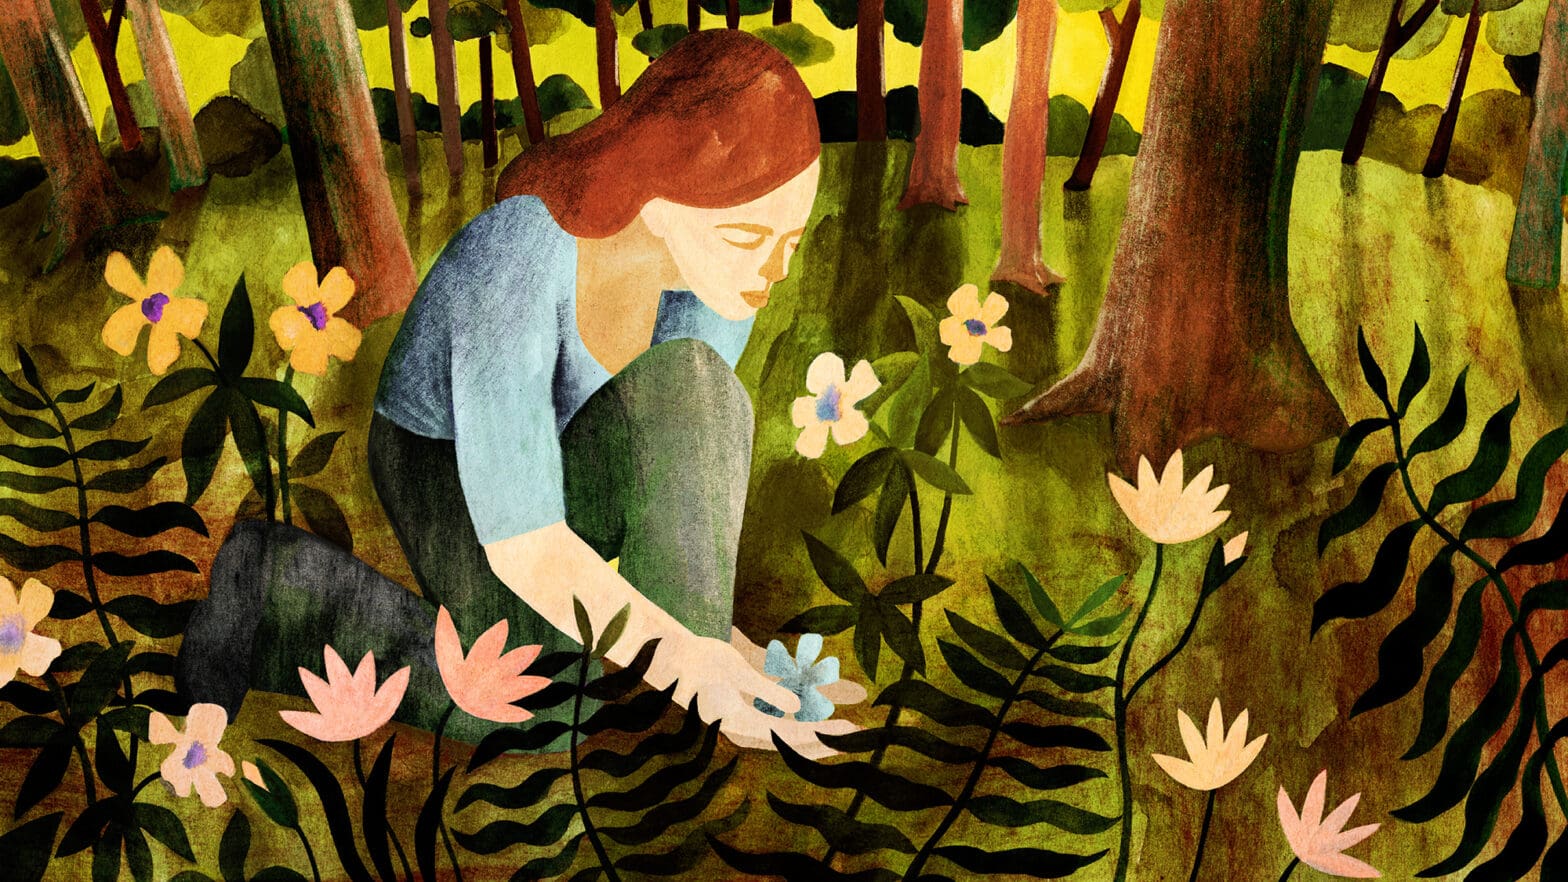 An illustration of a woman reaching for a flower on the forest floor